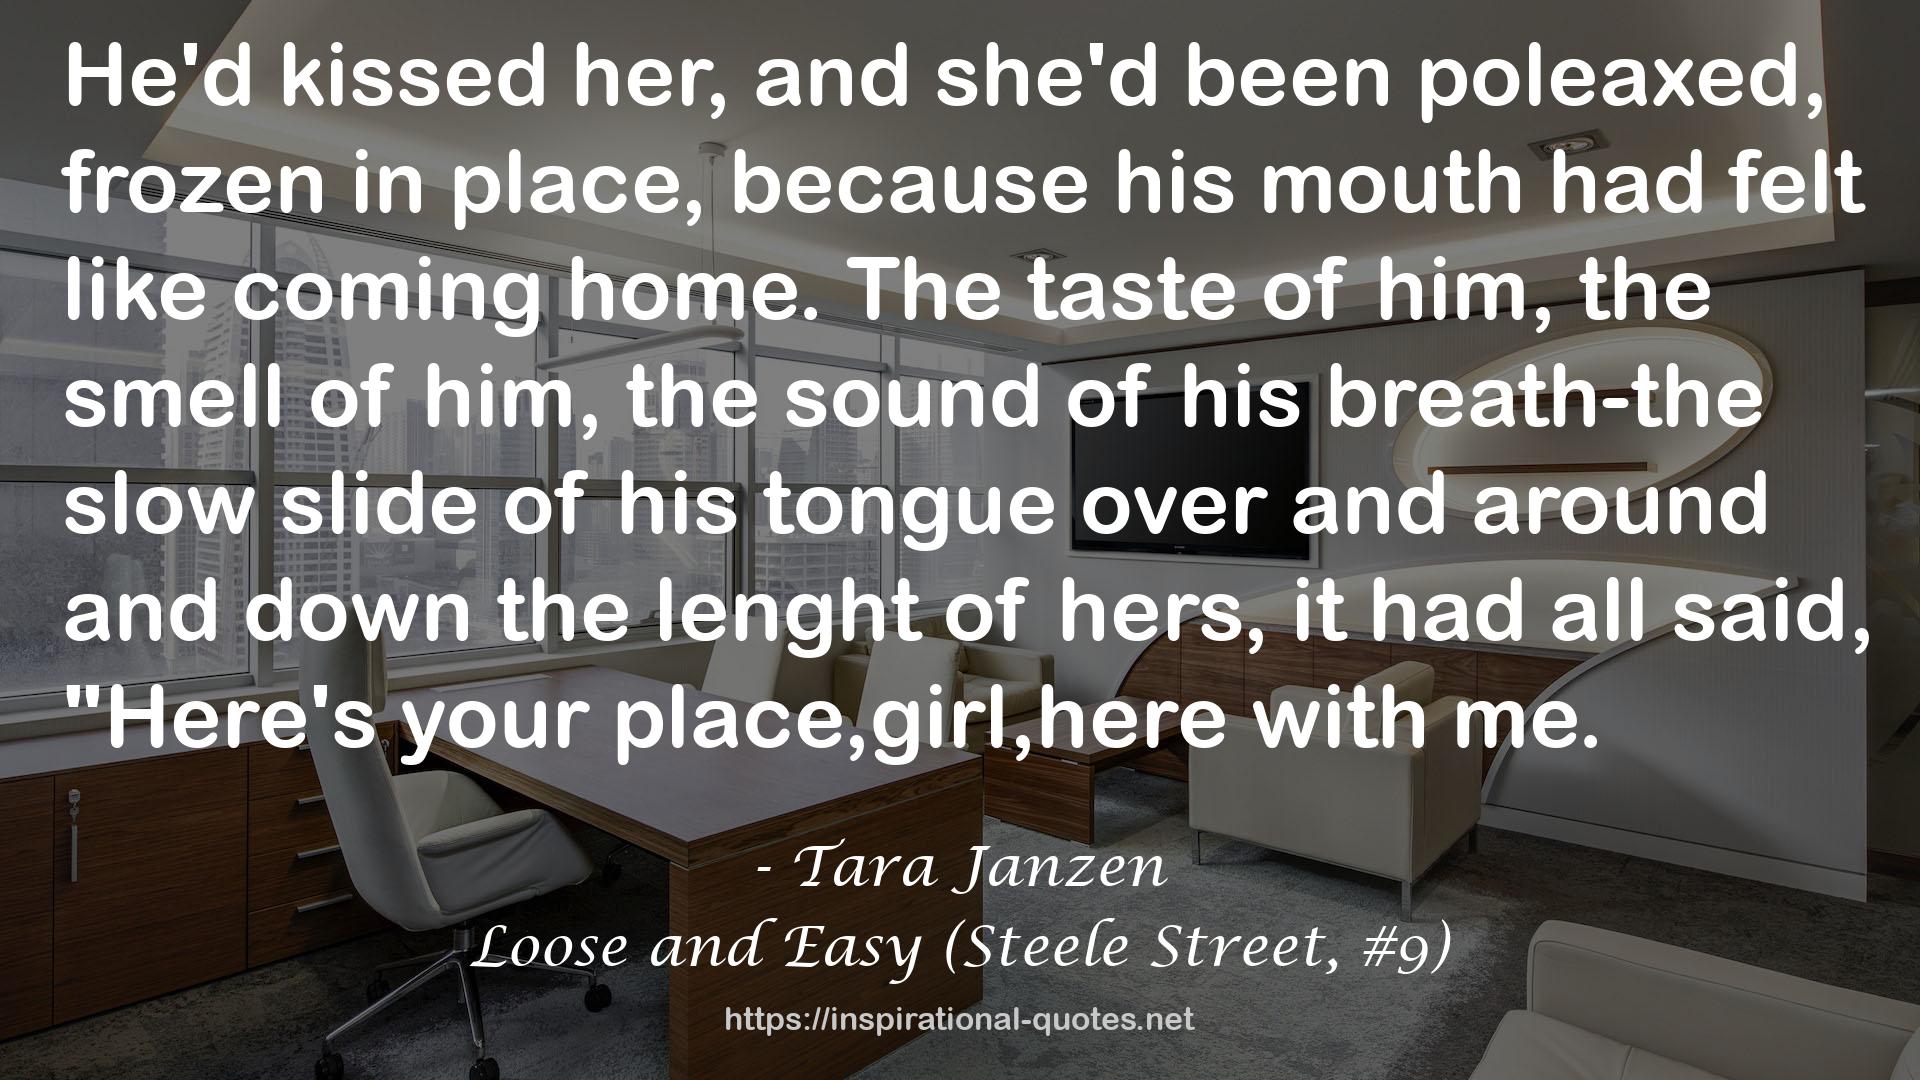 Loose and Easy (Steele Street, #9) QUOTES